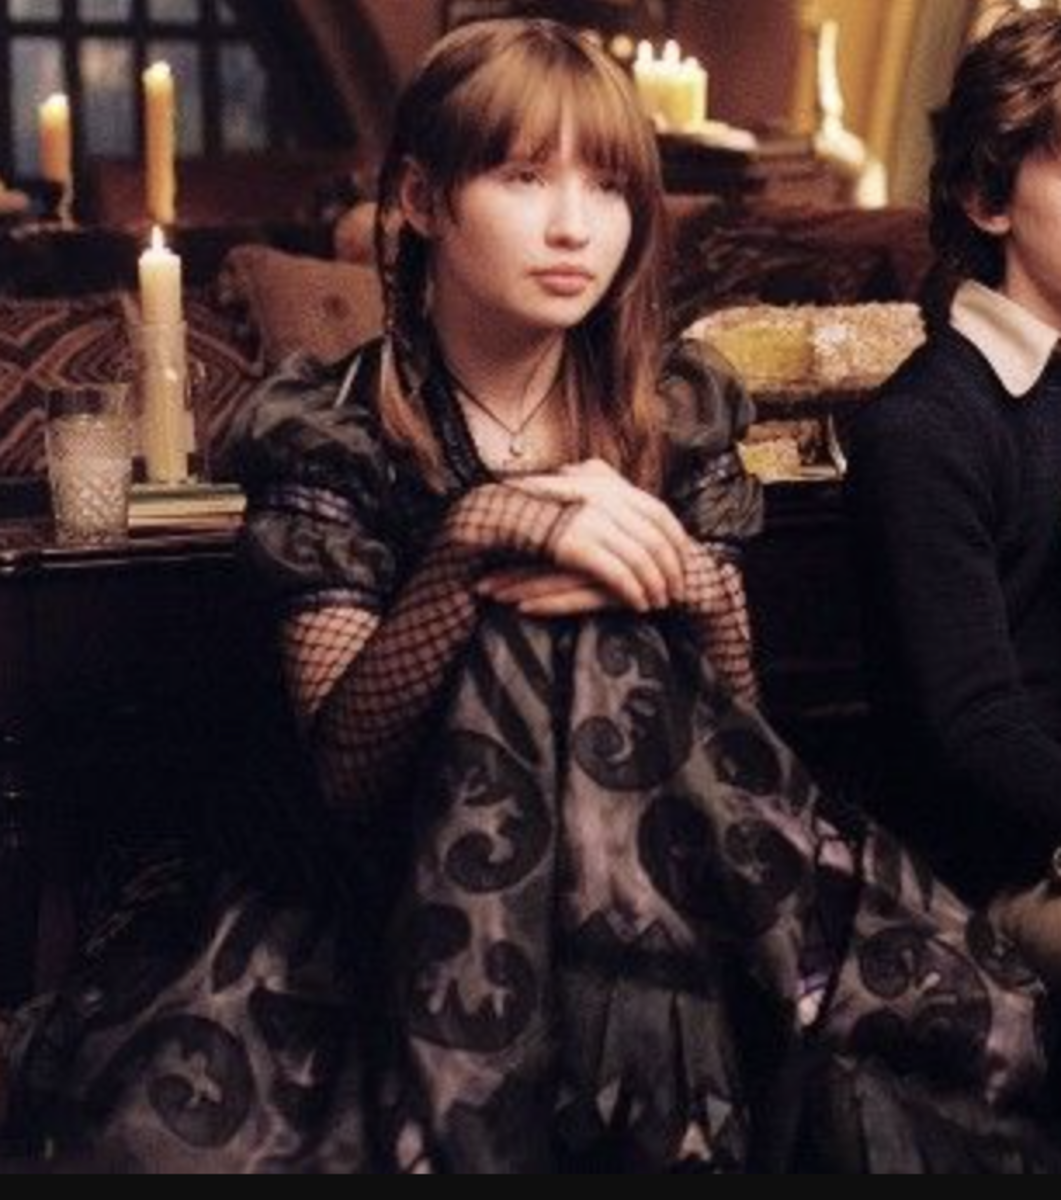 Emily Browning as Violet Baudelaire from Lemony Snicket’s A Series of Unfortunate Events